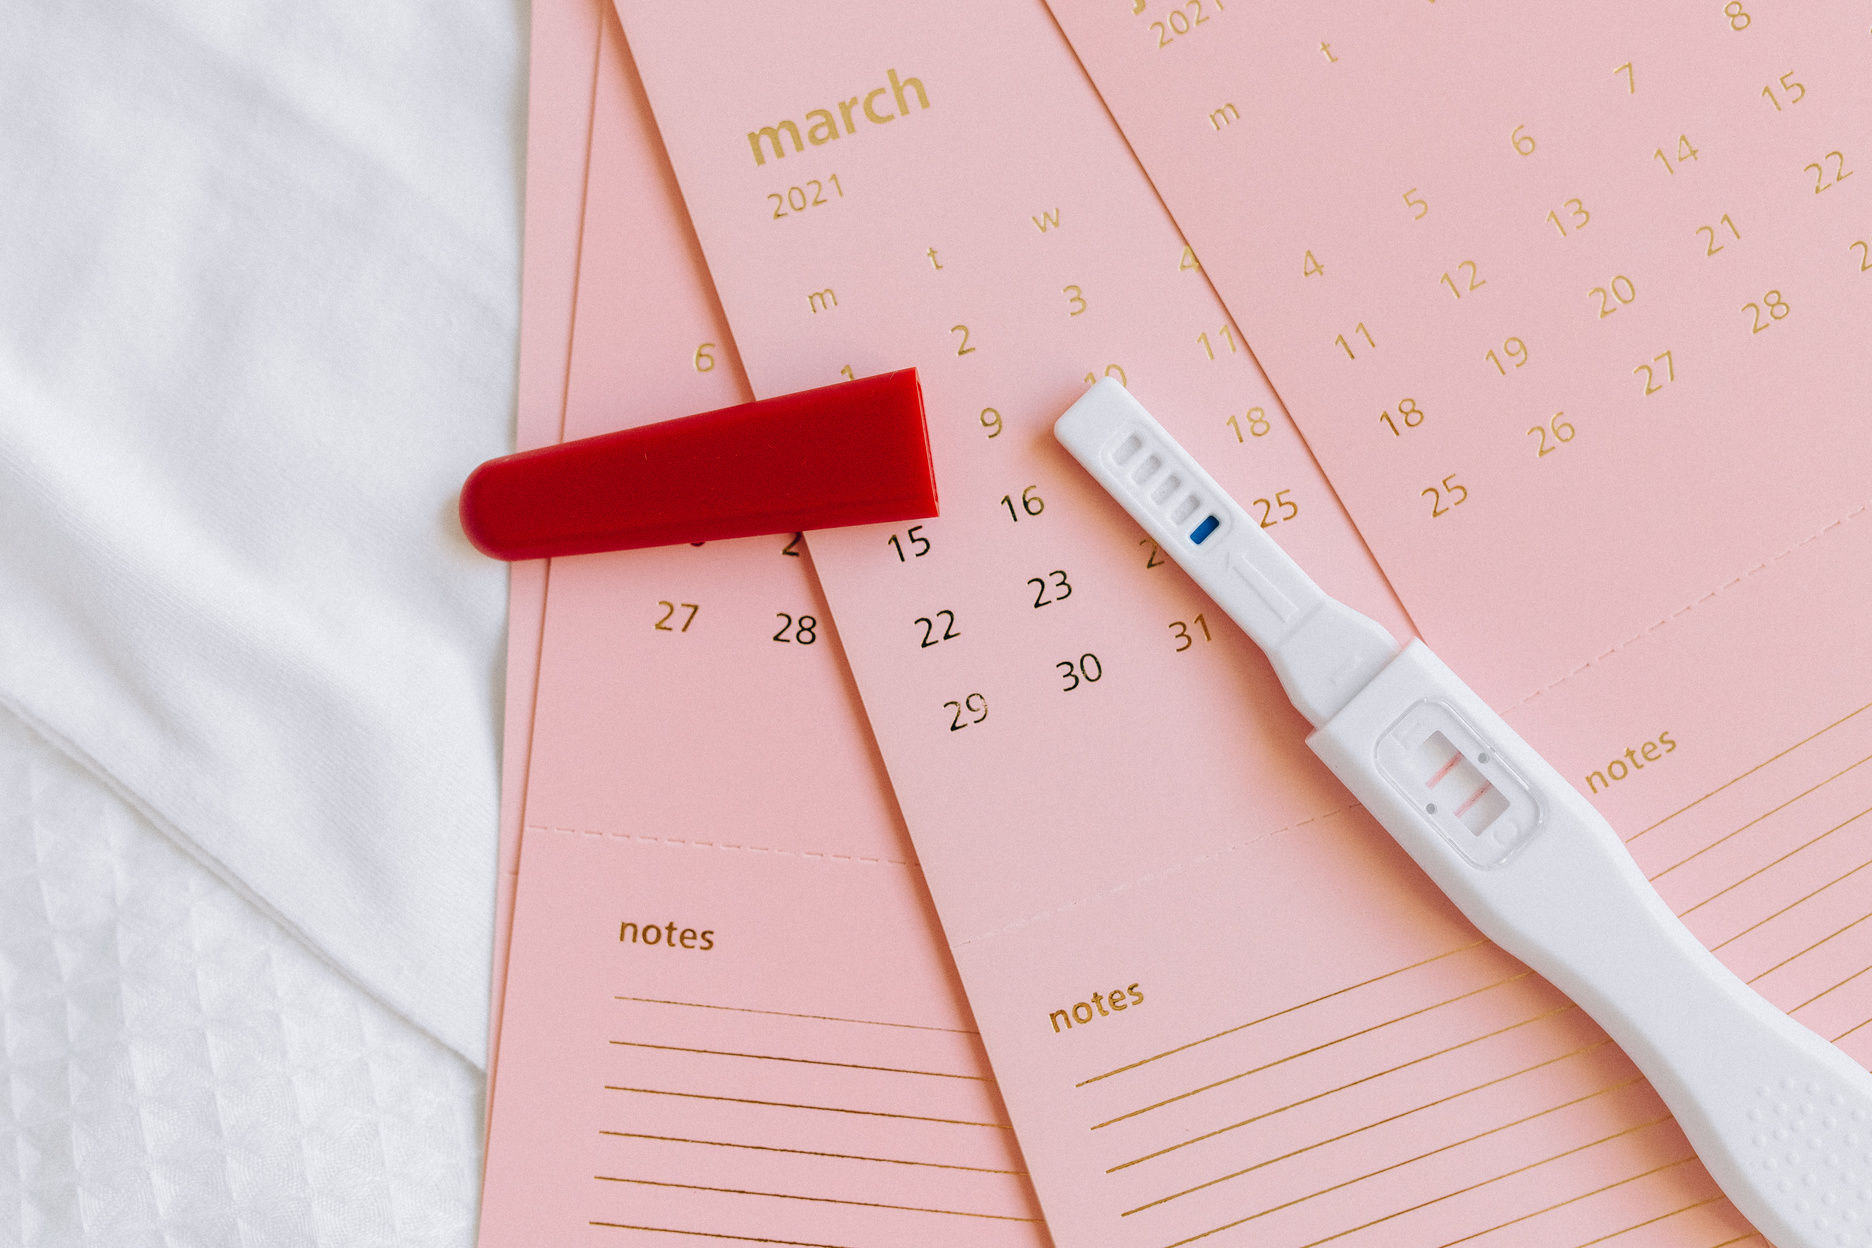 White and Red Pregnancy Test Kit